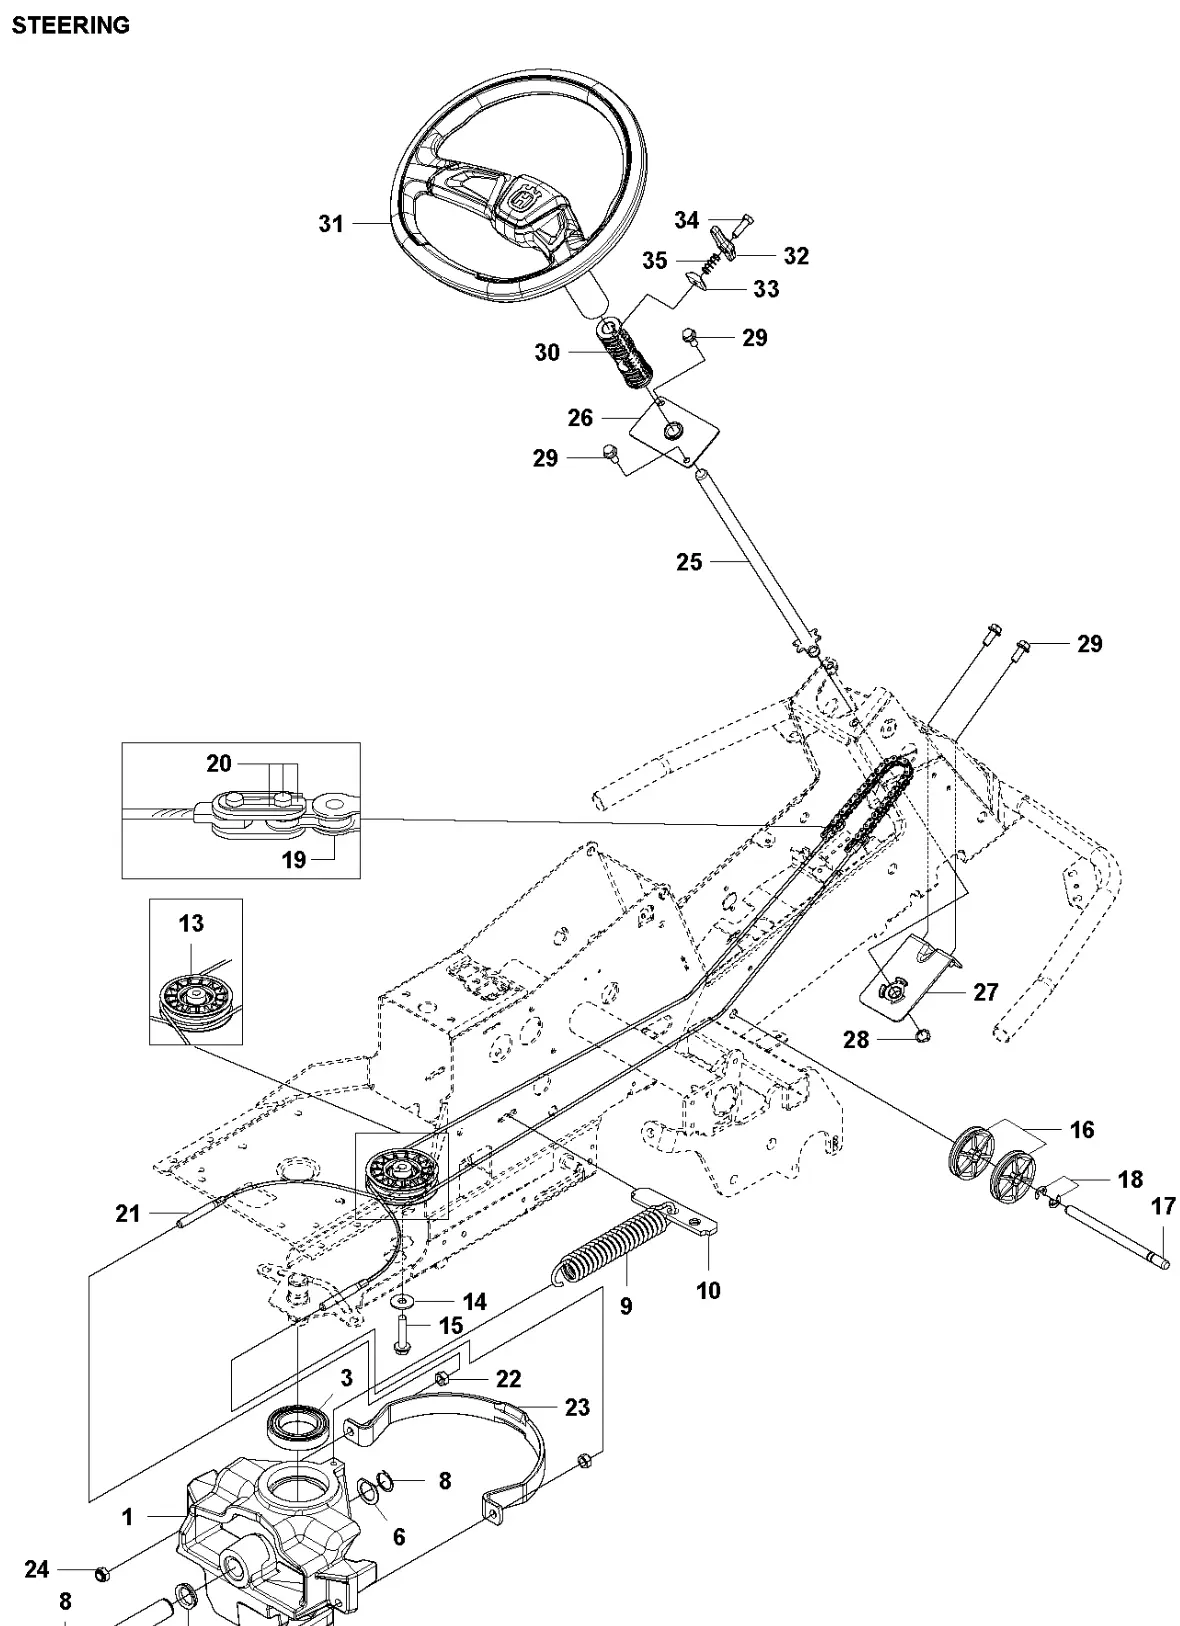 Engineering diagram of the mower's sterring system